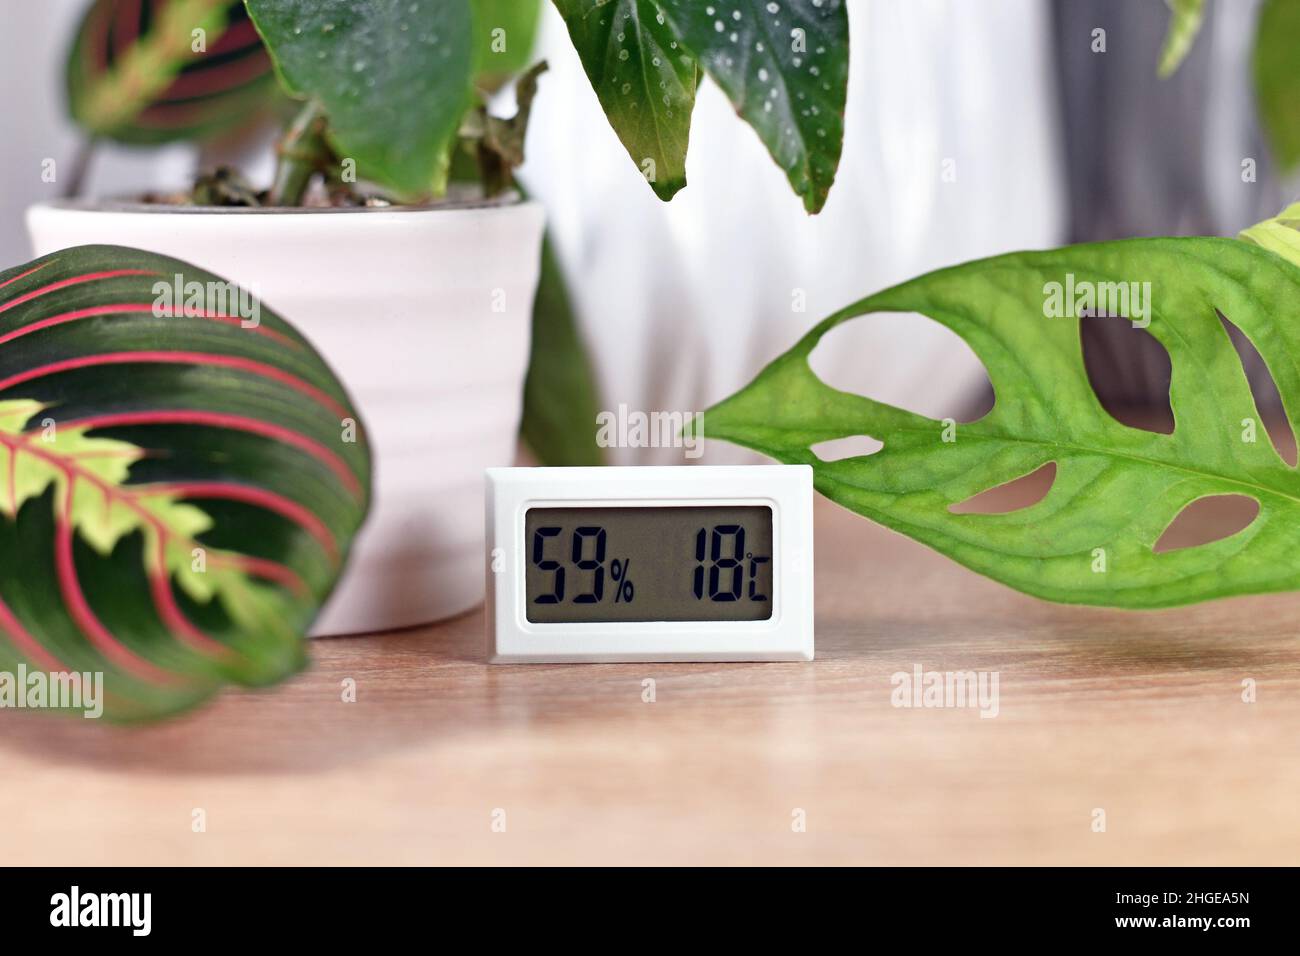 Hygrometer and thermometer device to measure humidity and temperature for houseplants Stock Photo